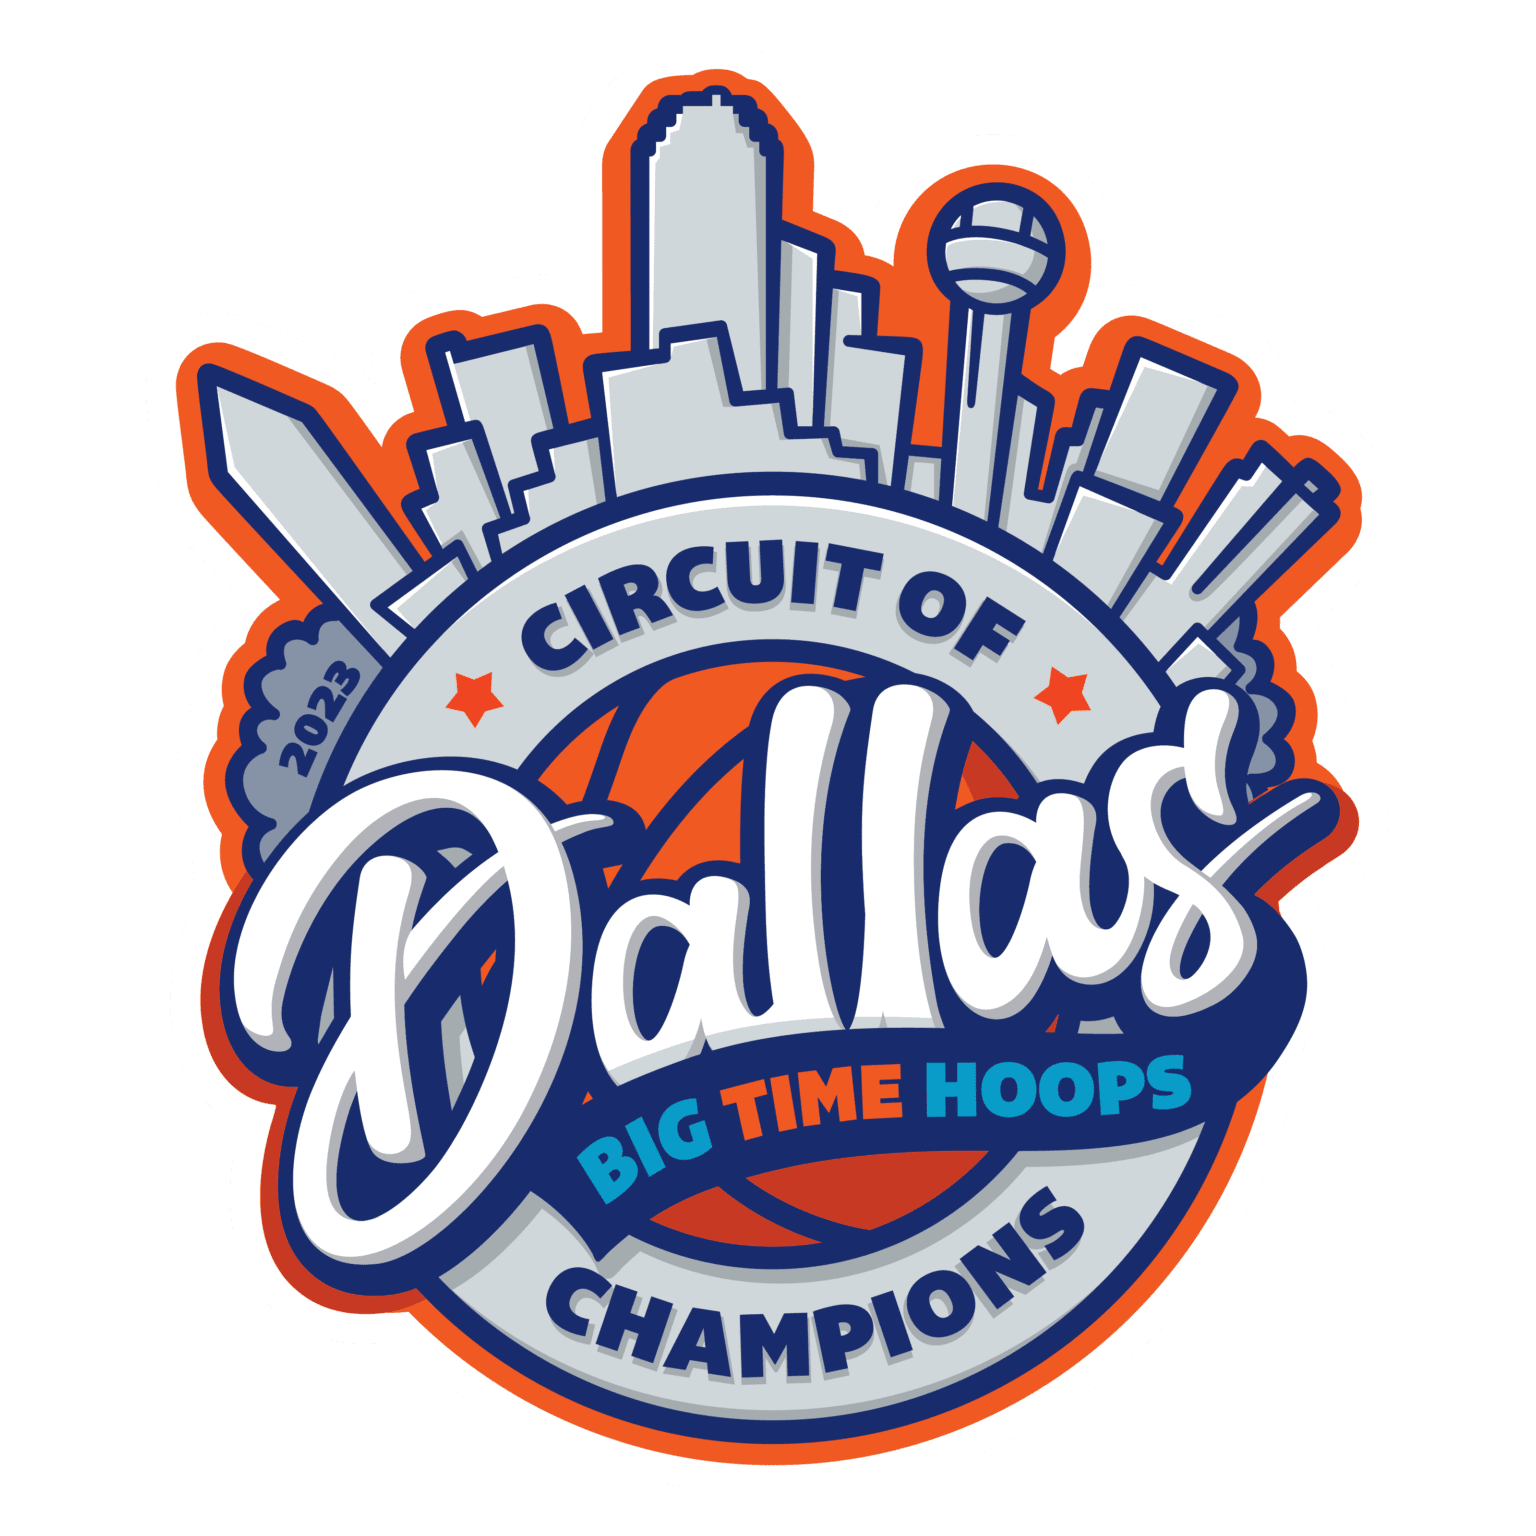 CIRCUIT OF CHAMPIONS DALLAS Big Time Hoops Basketball Tournaments